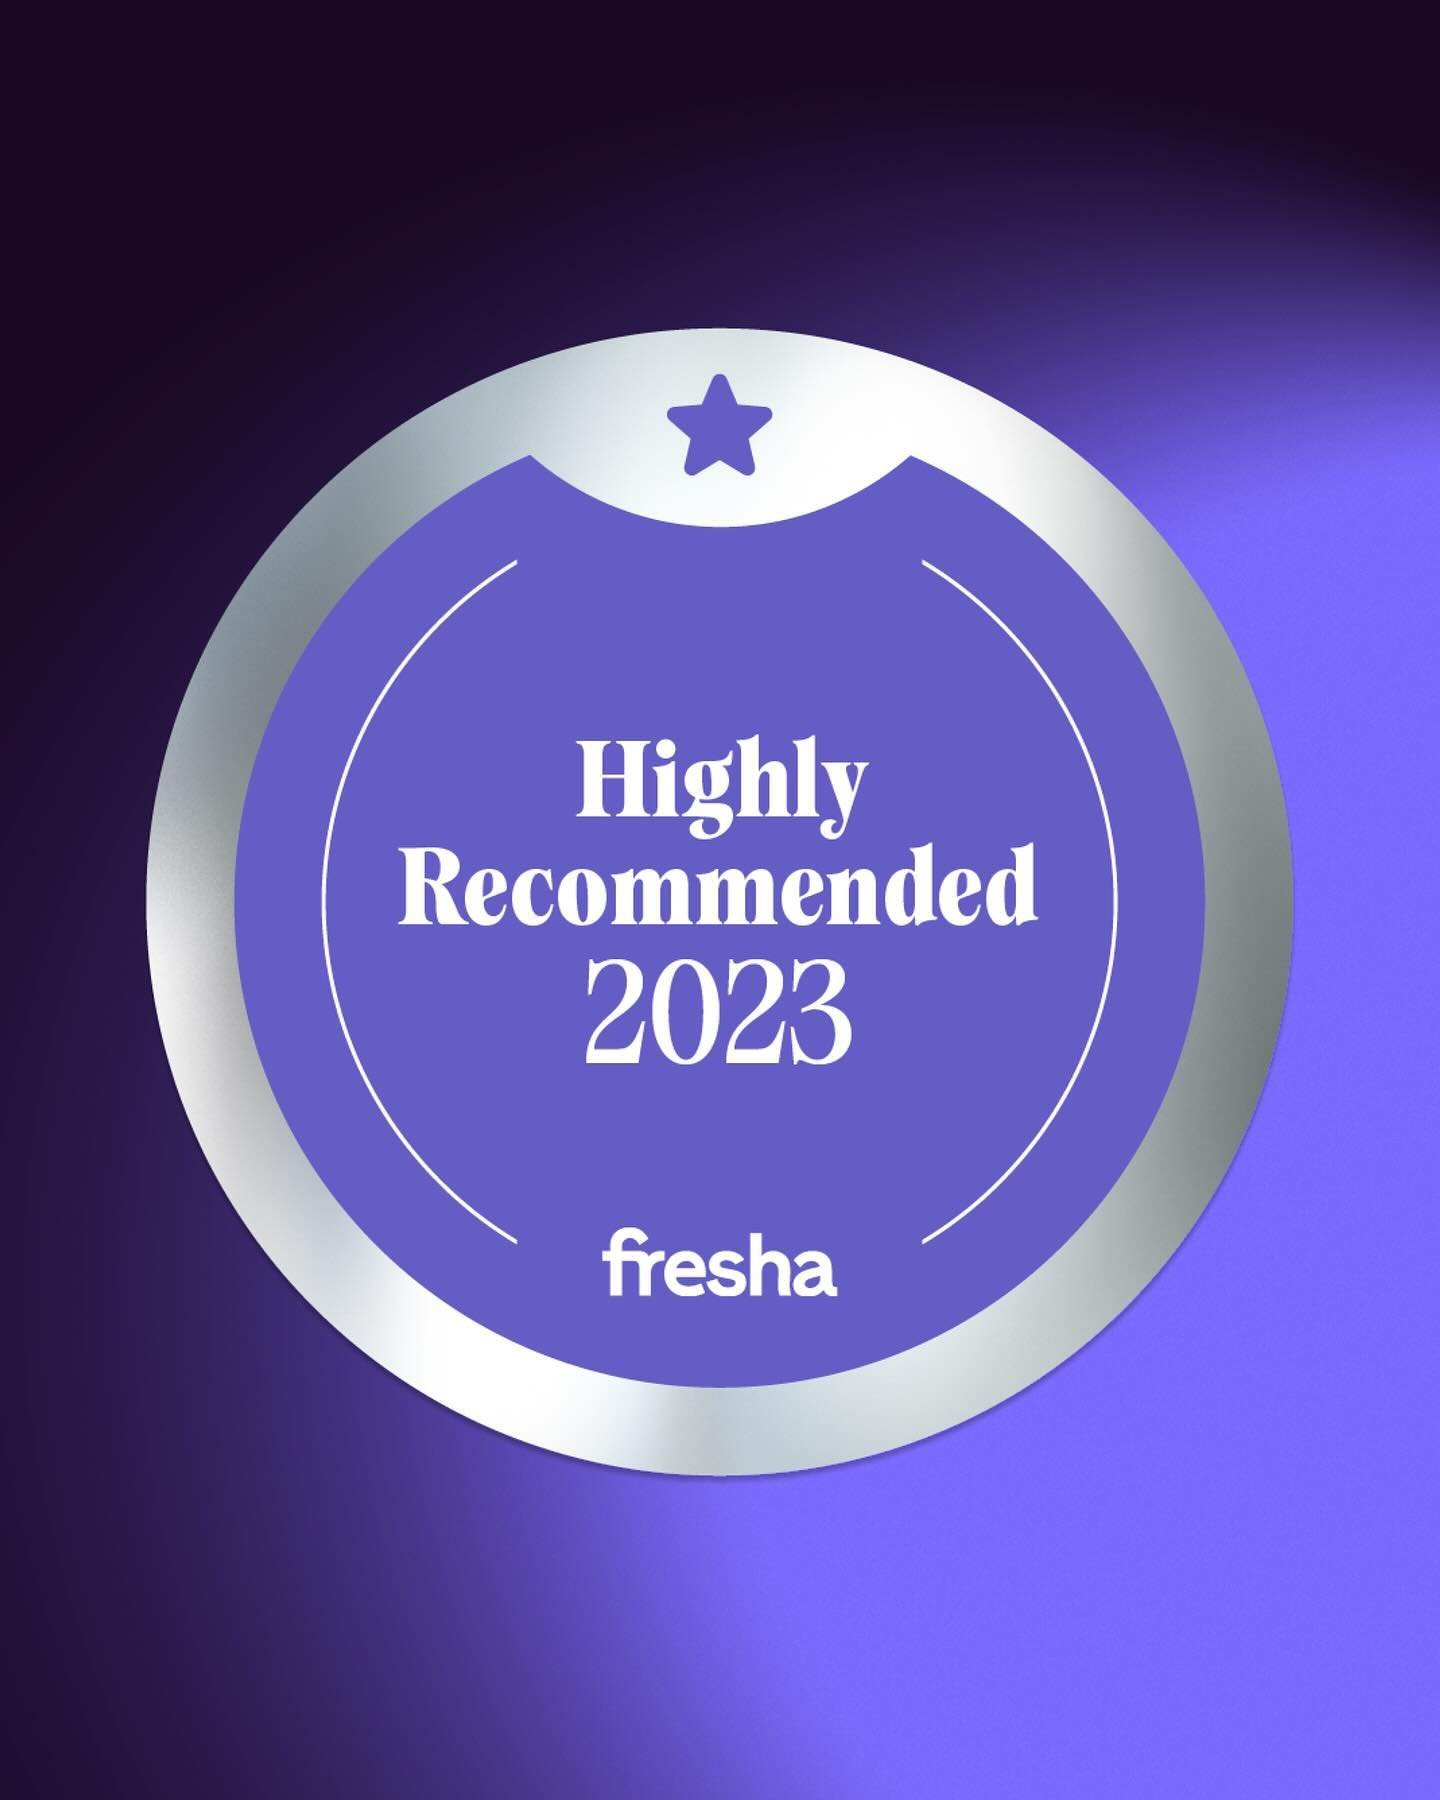 Fresha awards 2023

It&rsquo;s official, you&rsquo;re one of our Highly Recommended 2023 🎉

Every year we celebrate the very best of our community. 

Highly Recommended means you&rsquo;re among the best on Fresha out of over 100,000 beauty and welln